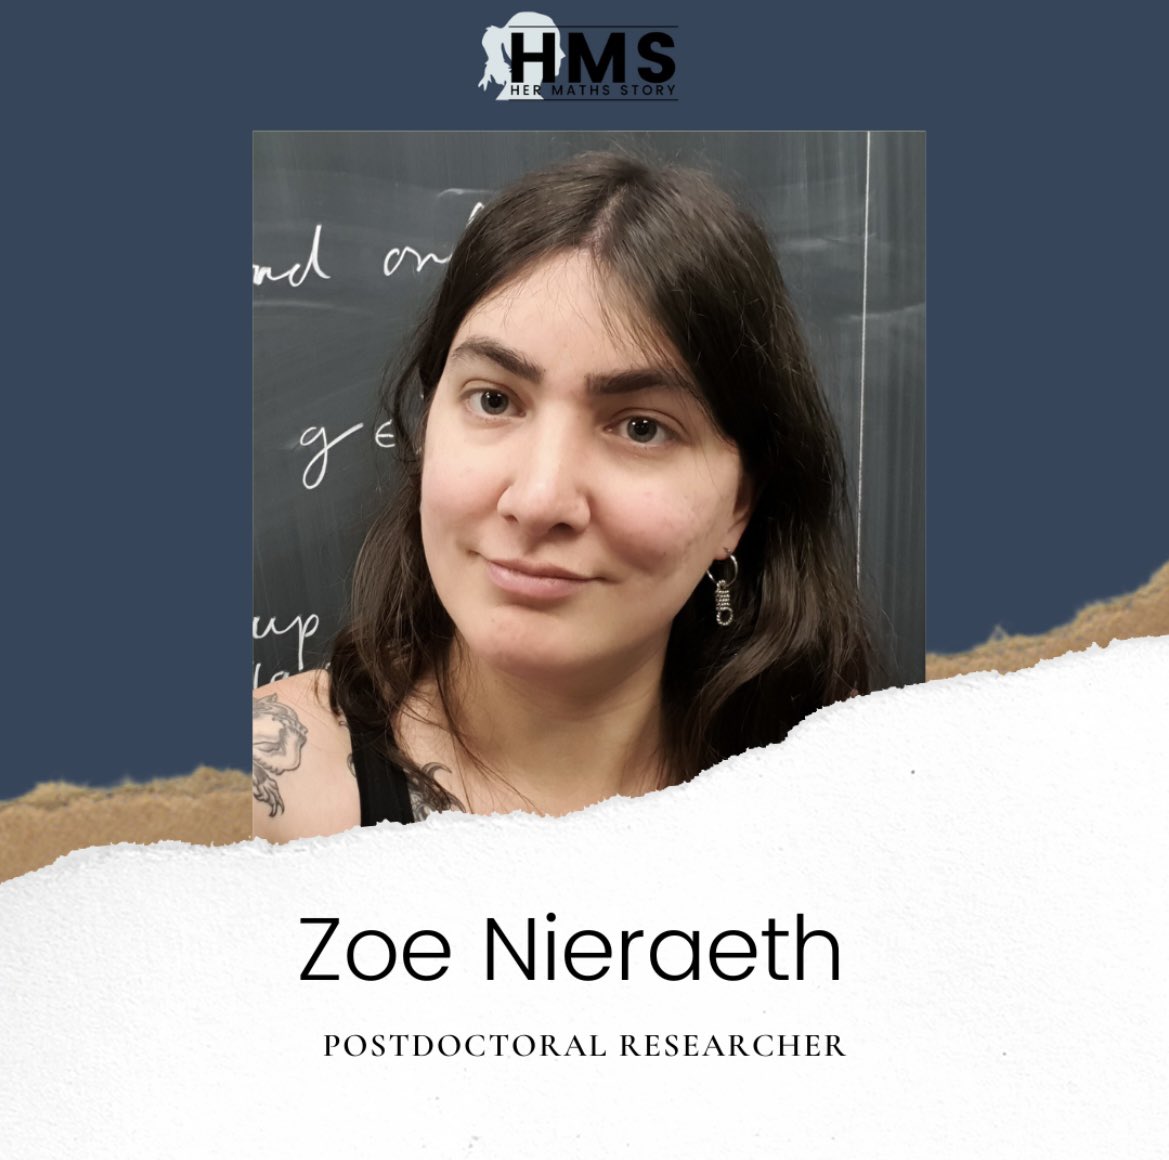 “Despite all of this, I have come to a point where I can proudly announce that I am a woman and a mathematician.” - Zoe Nieraeth

➡️hermathsstory.eu/zoe-nieraeth/

#academia #PhD #Postdoc #Trans #TransInSTEM #WomenInMath #WomenInSTEM #HerMathsStory